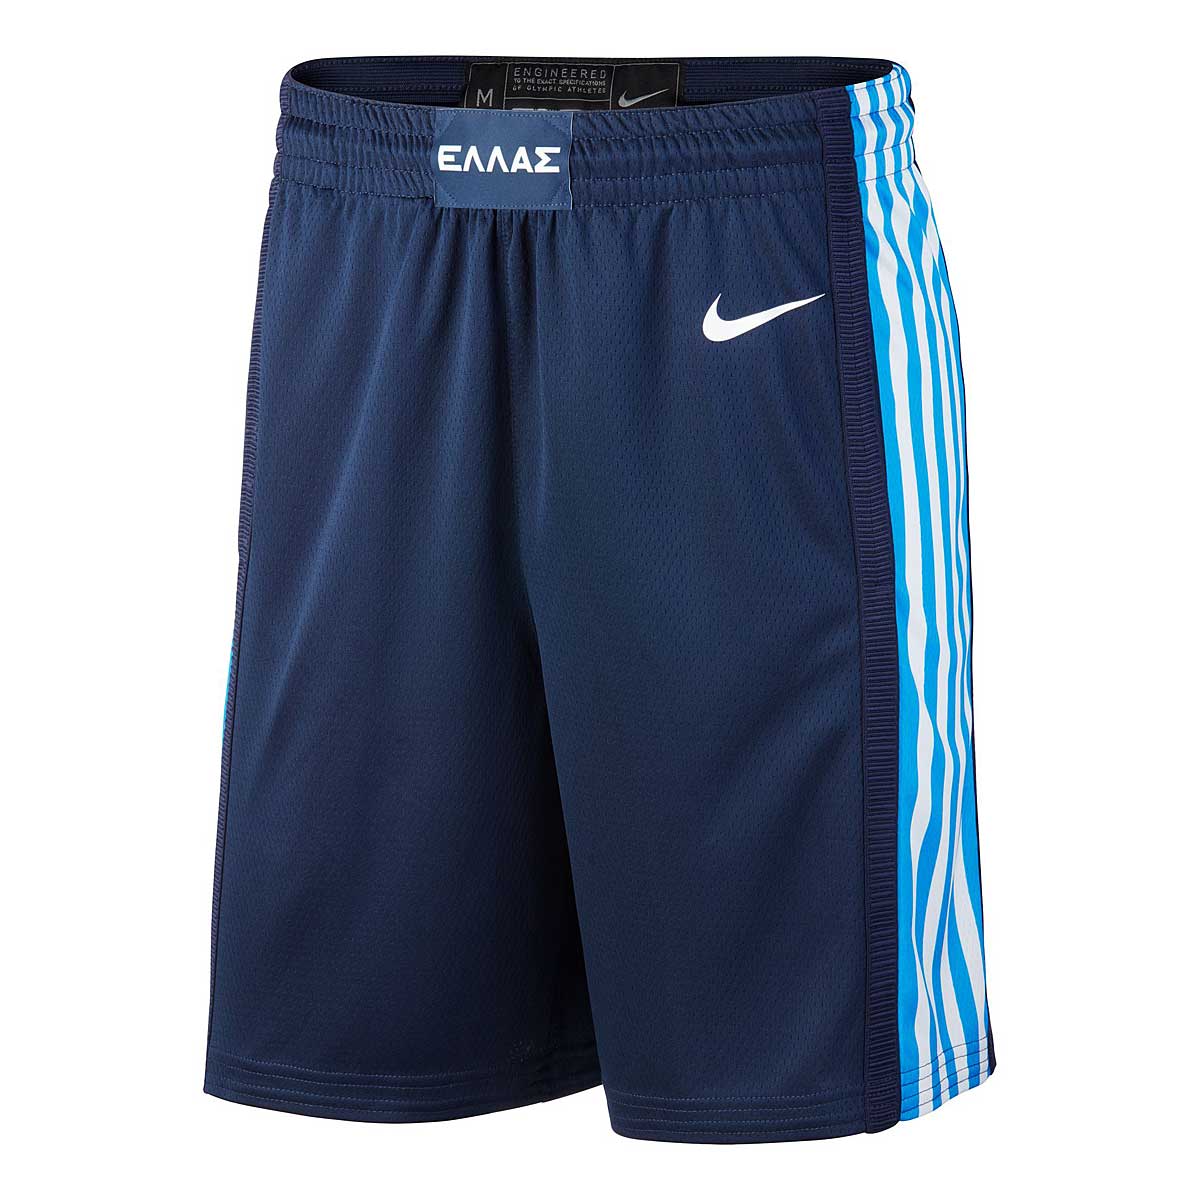 Image of Nike Fiba World Cup Greece Basketball Road Shorts, College Navy/white